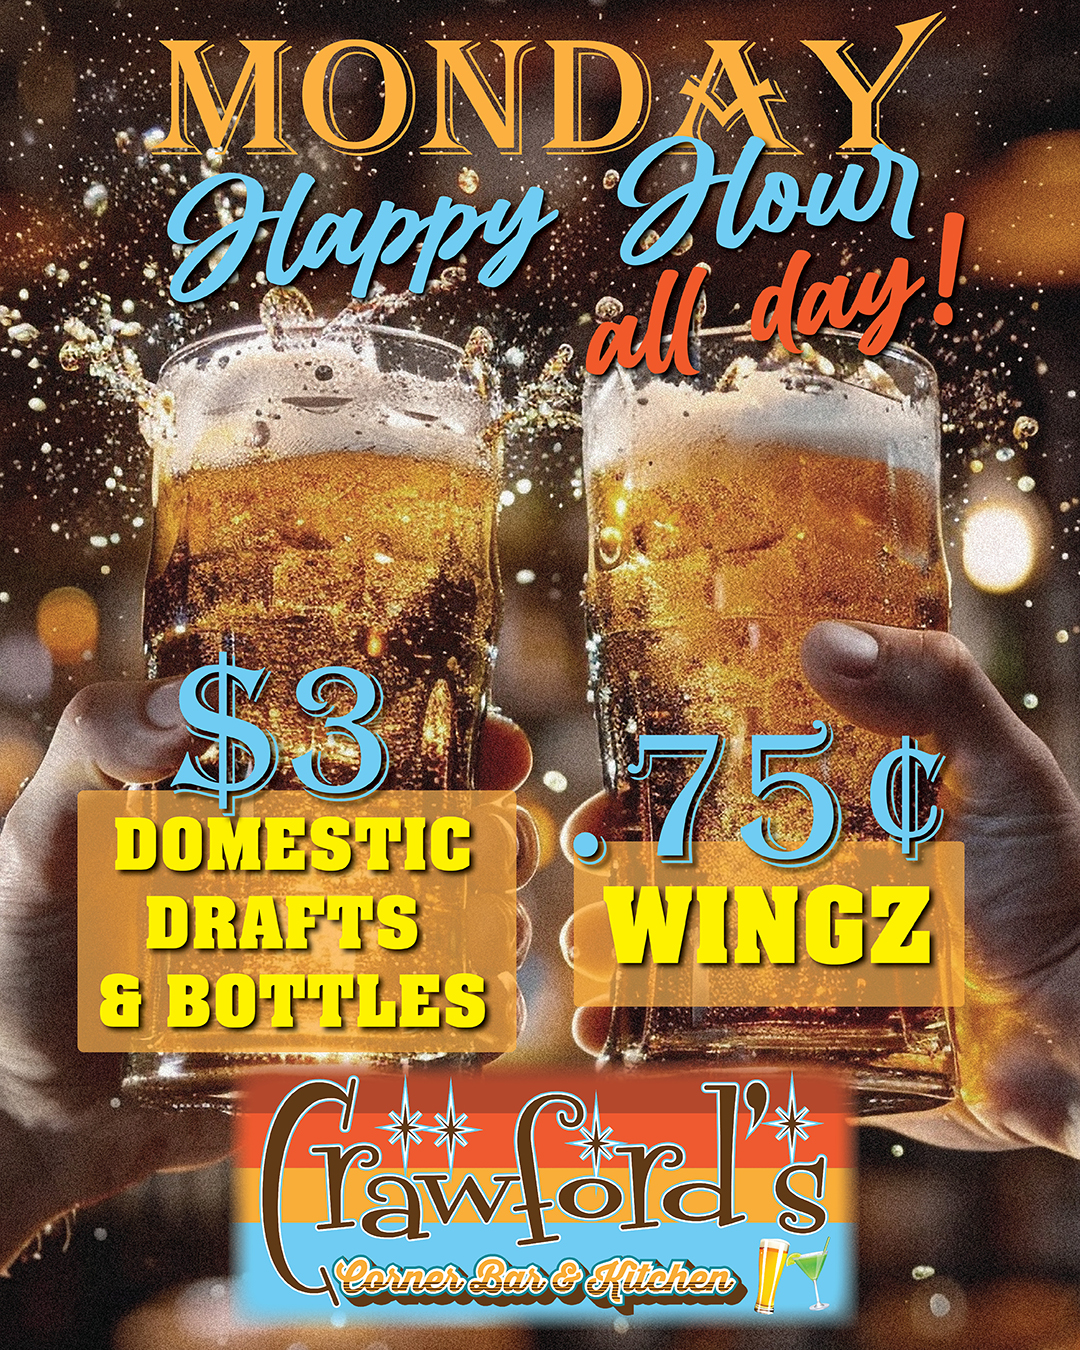 Two hands raise beer glasses in a celebratory manner. Text highlights "Monday Happy Hour all day" at Crawford's with $3 domestic drafts and bottles, and 75¢ wings.